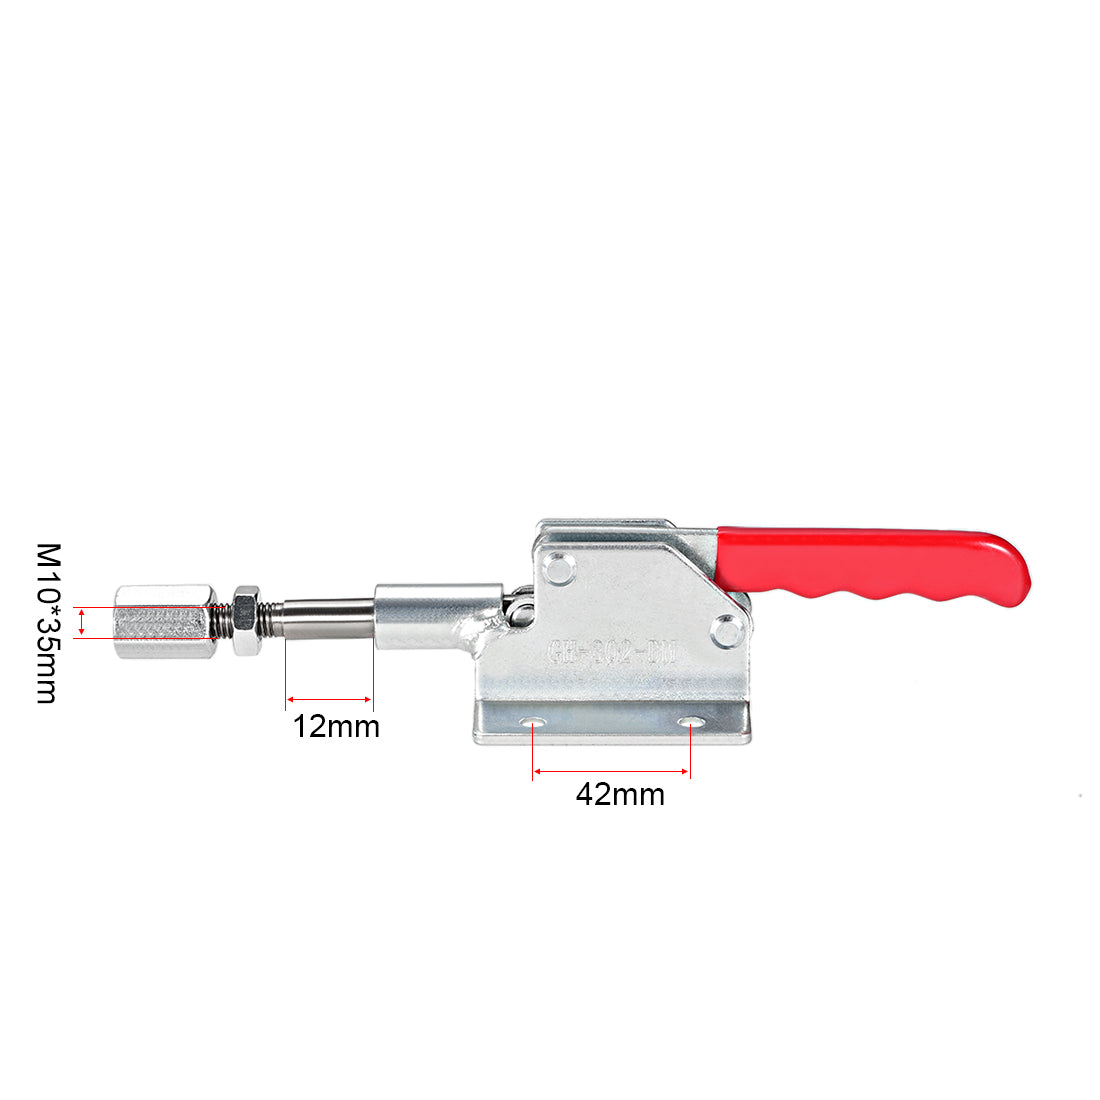 uxcell Uxcell Hand Tool Pull Push Action Toggle Clamp Quick Release Clamp 370 lbs/170kg Holding Capacity 12mm Stroke